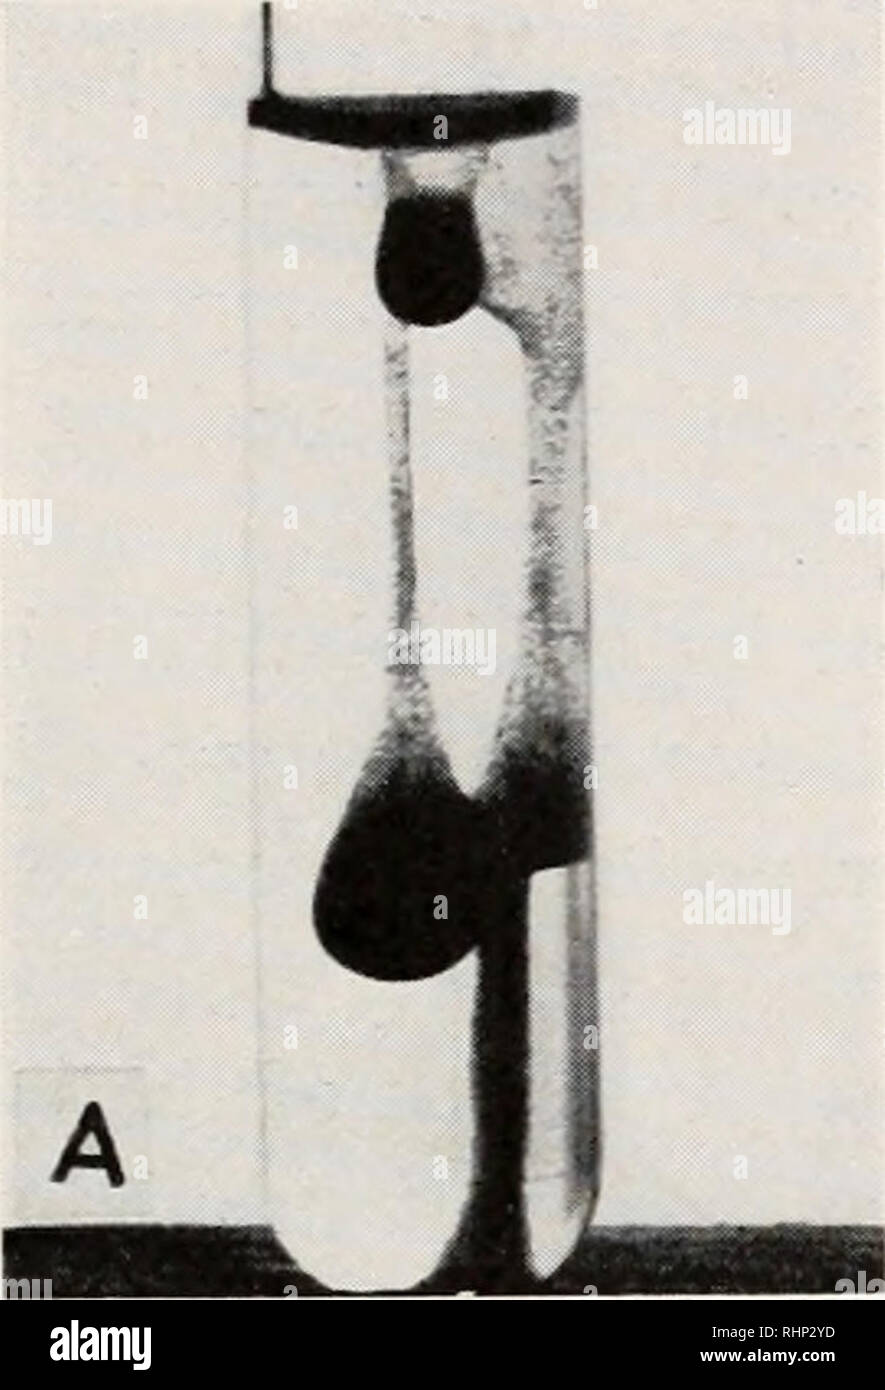 . The Biological bulletin. Biology; Zoology; Biology; Marine Biology. PROPERTIES OF ARBACIA SPERM EXTRACTS 193 a homogeneous suspension which slowly settles (Fig. 1, C). Subse- quent agitation of each tube causes an increase in the density of the egg- masses in the extract, while the eggs in sea water redistribute them- selves through the solution and again settle to the bottom of the tube. We will call this phenomenon the &quot; egg-agglutination reaction,&quot; and the inciting substance present in sperm extracts, the egg-agglutinating sub- stance. These terms are used in a purely descriptiv Stock Photo